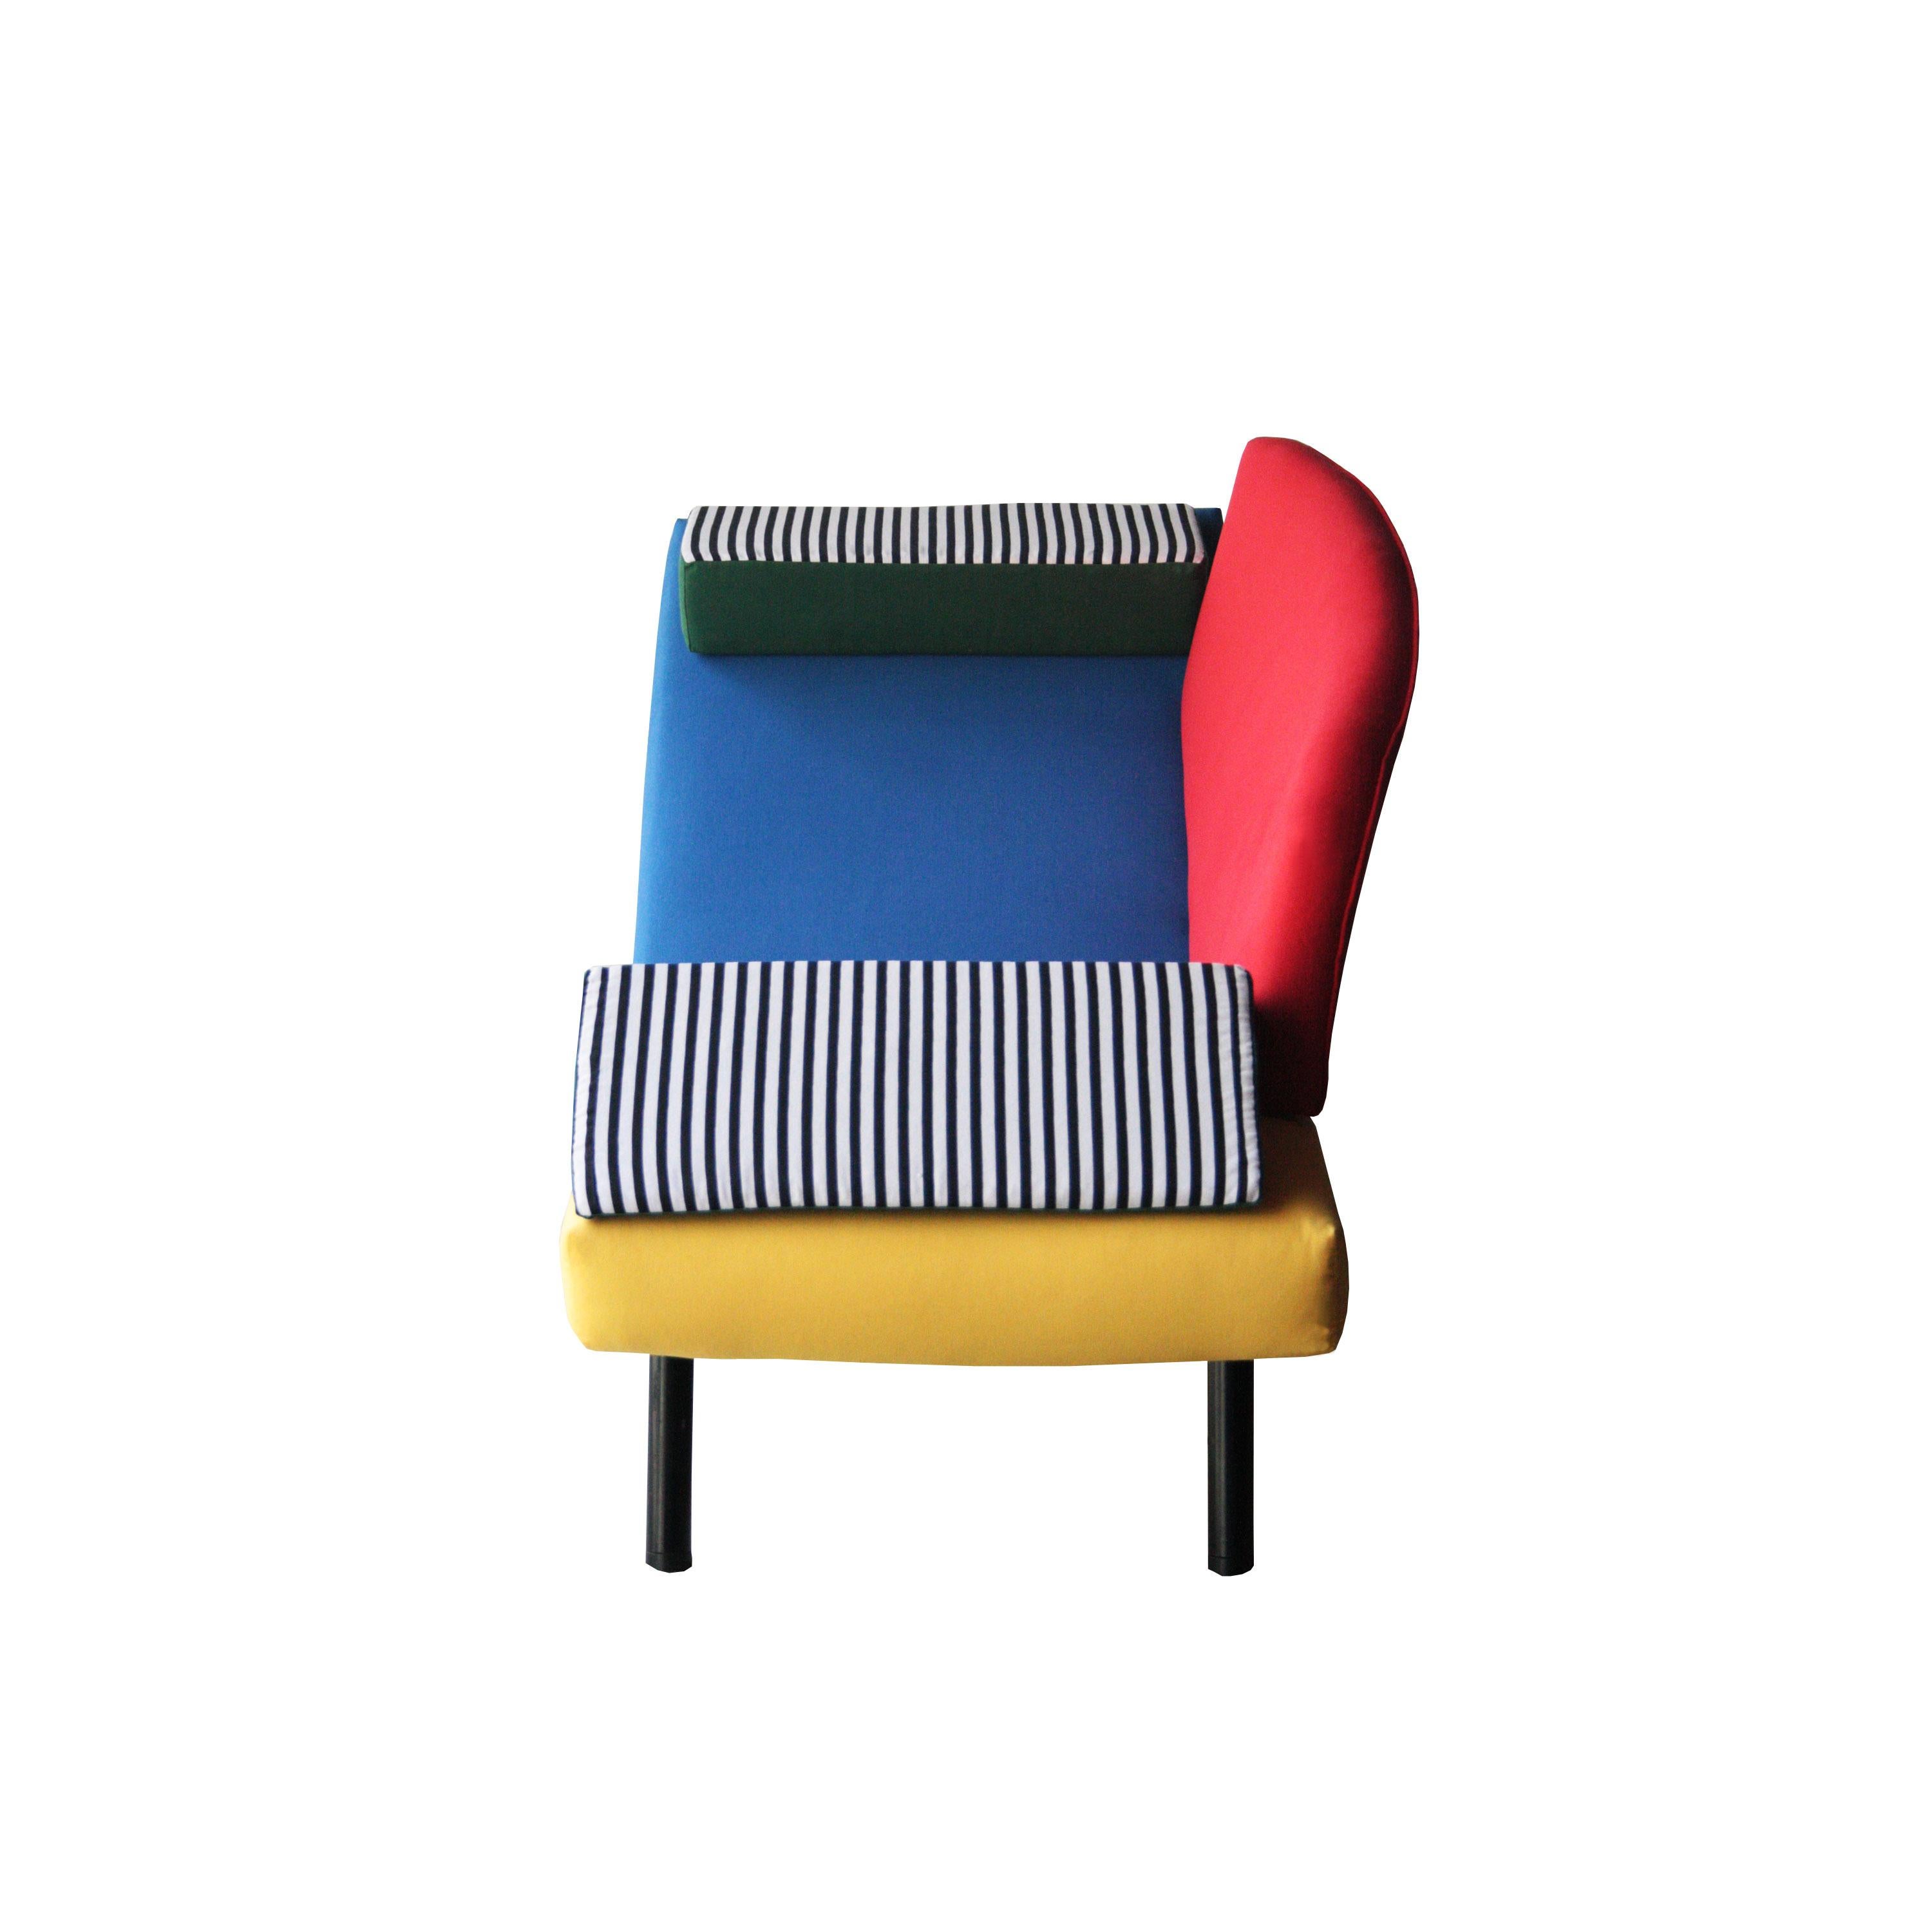 Post-Modern After Memphis Geometric Blue Yellow Red Green Metal Italian Chaise Longue, 1980